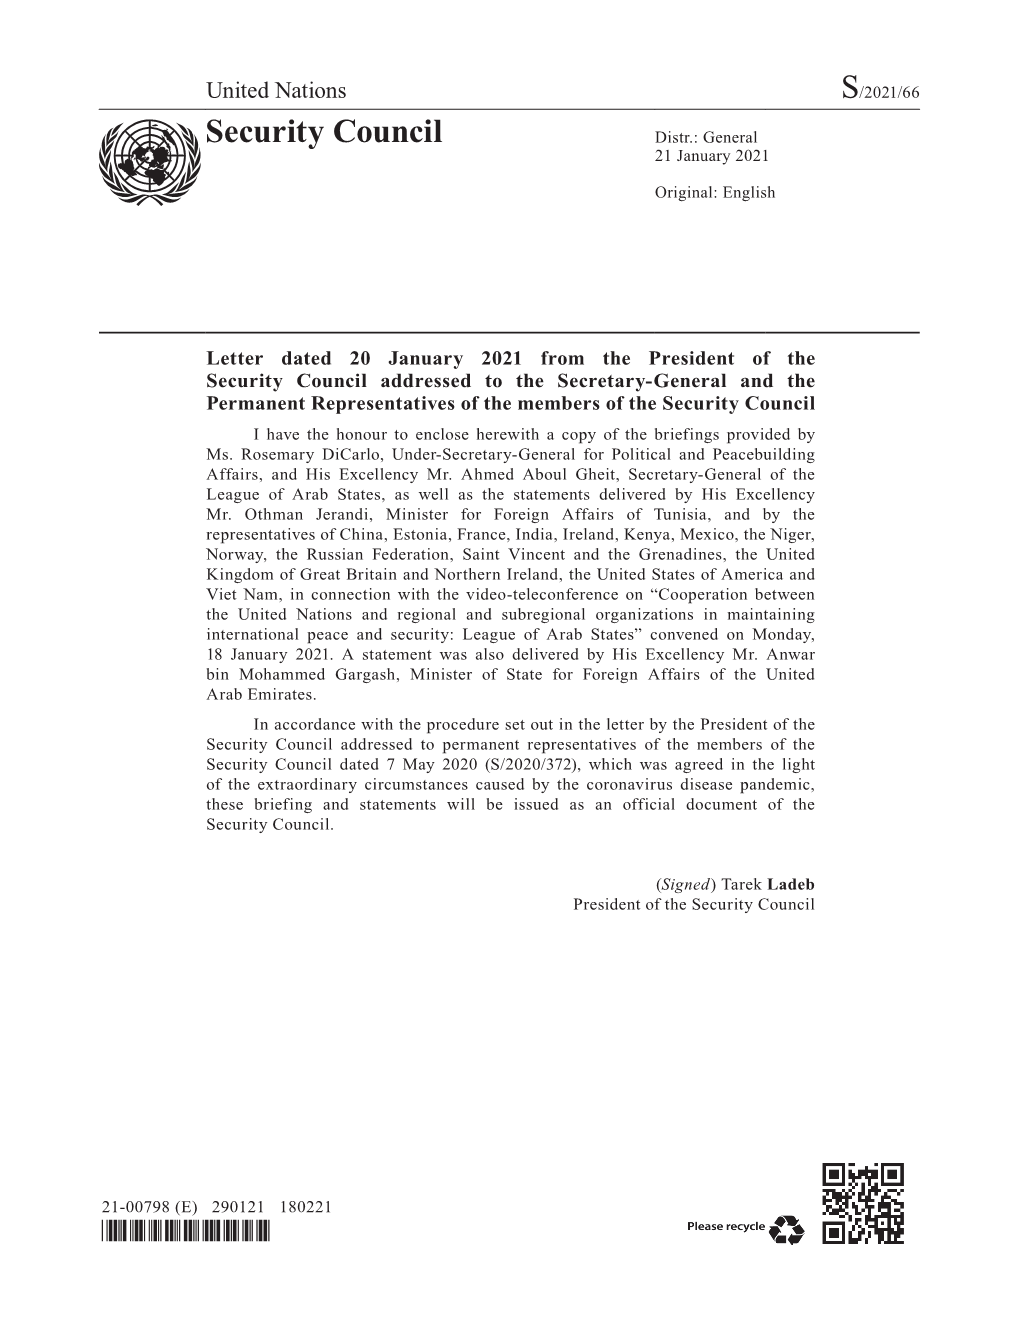 Letter Dated 20 January 2021 from the President of the Security Council